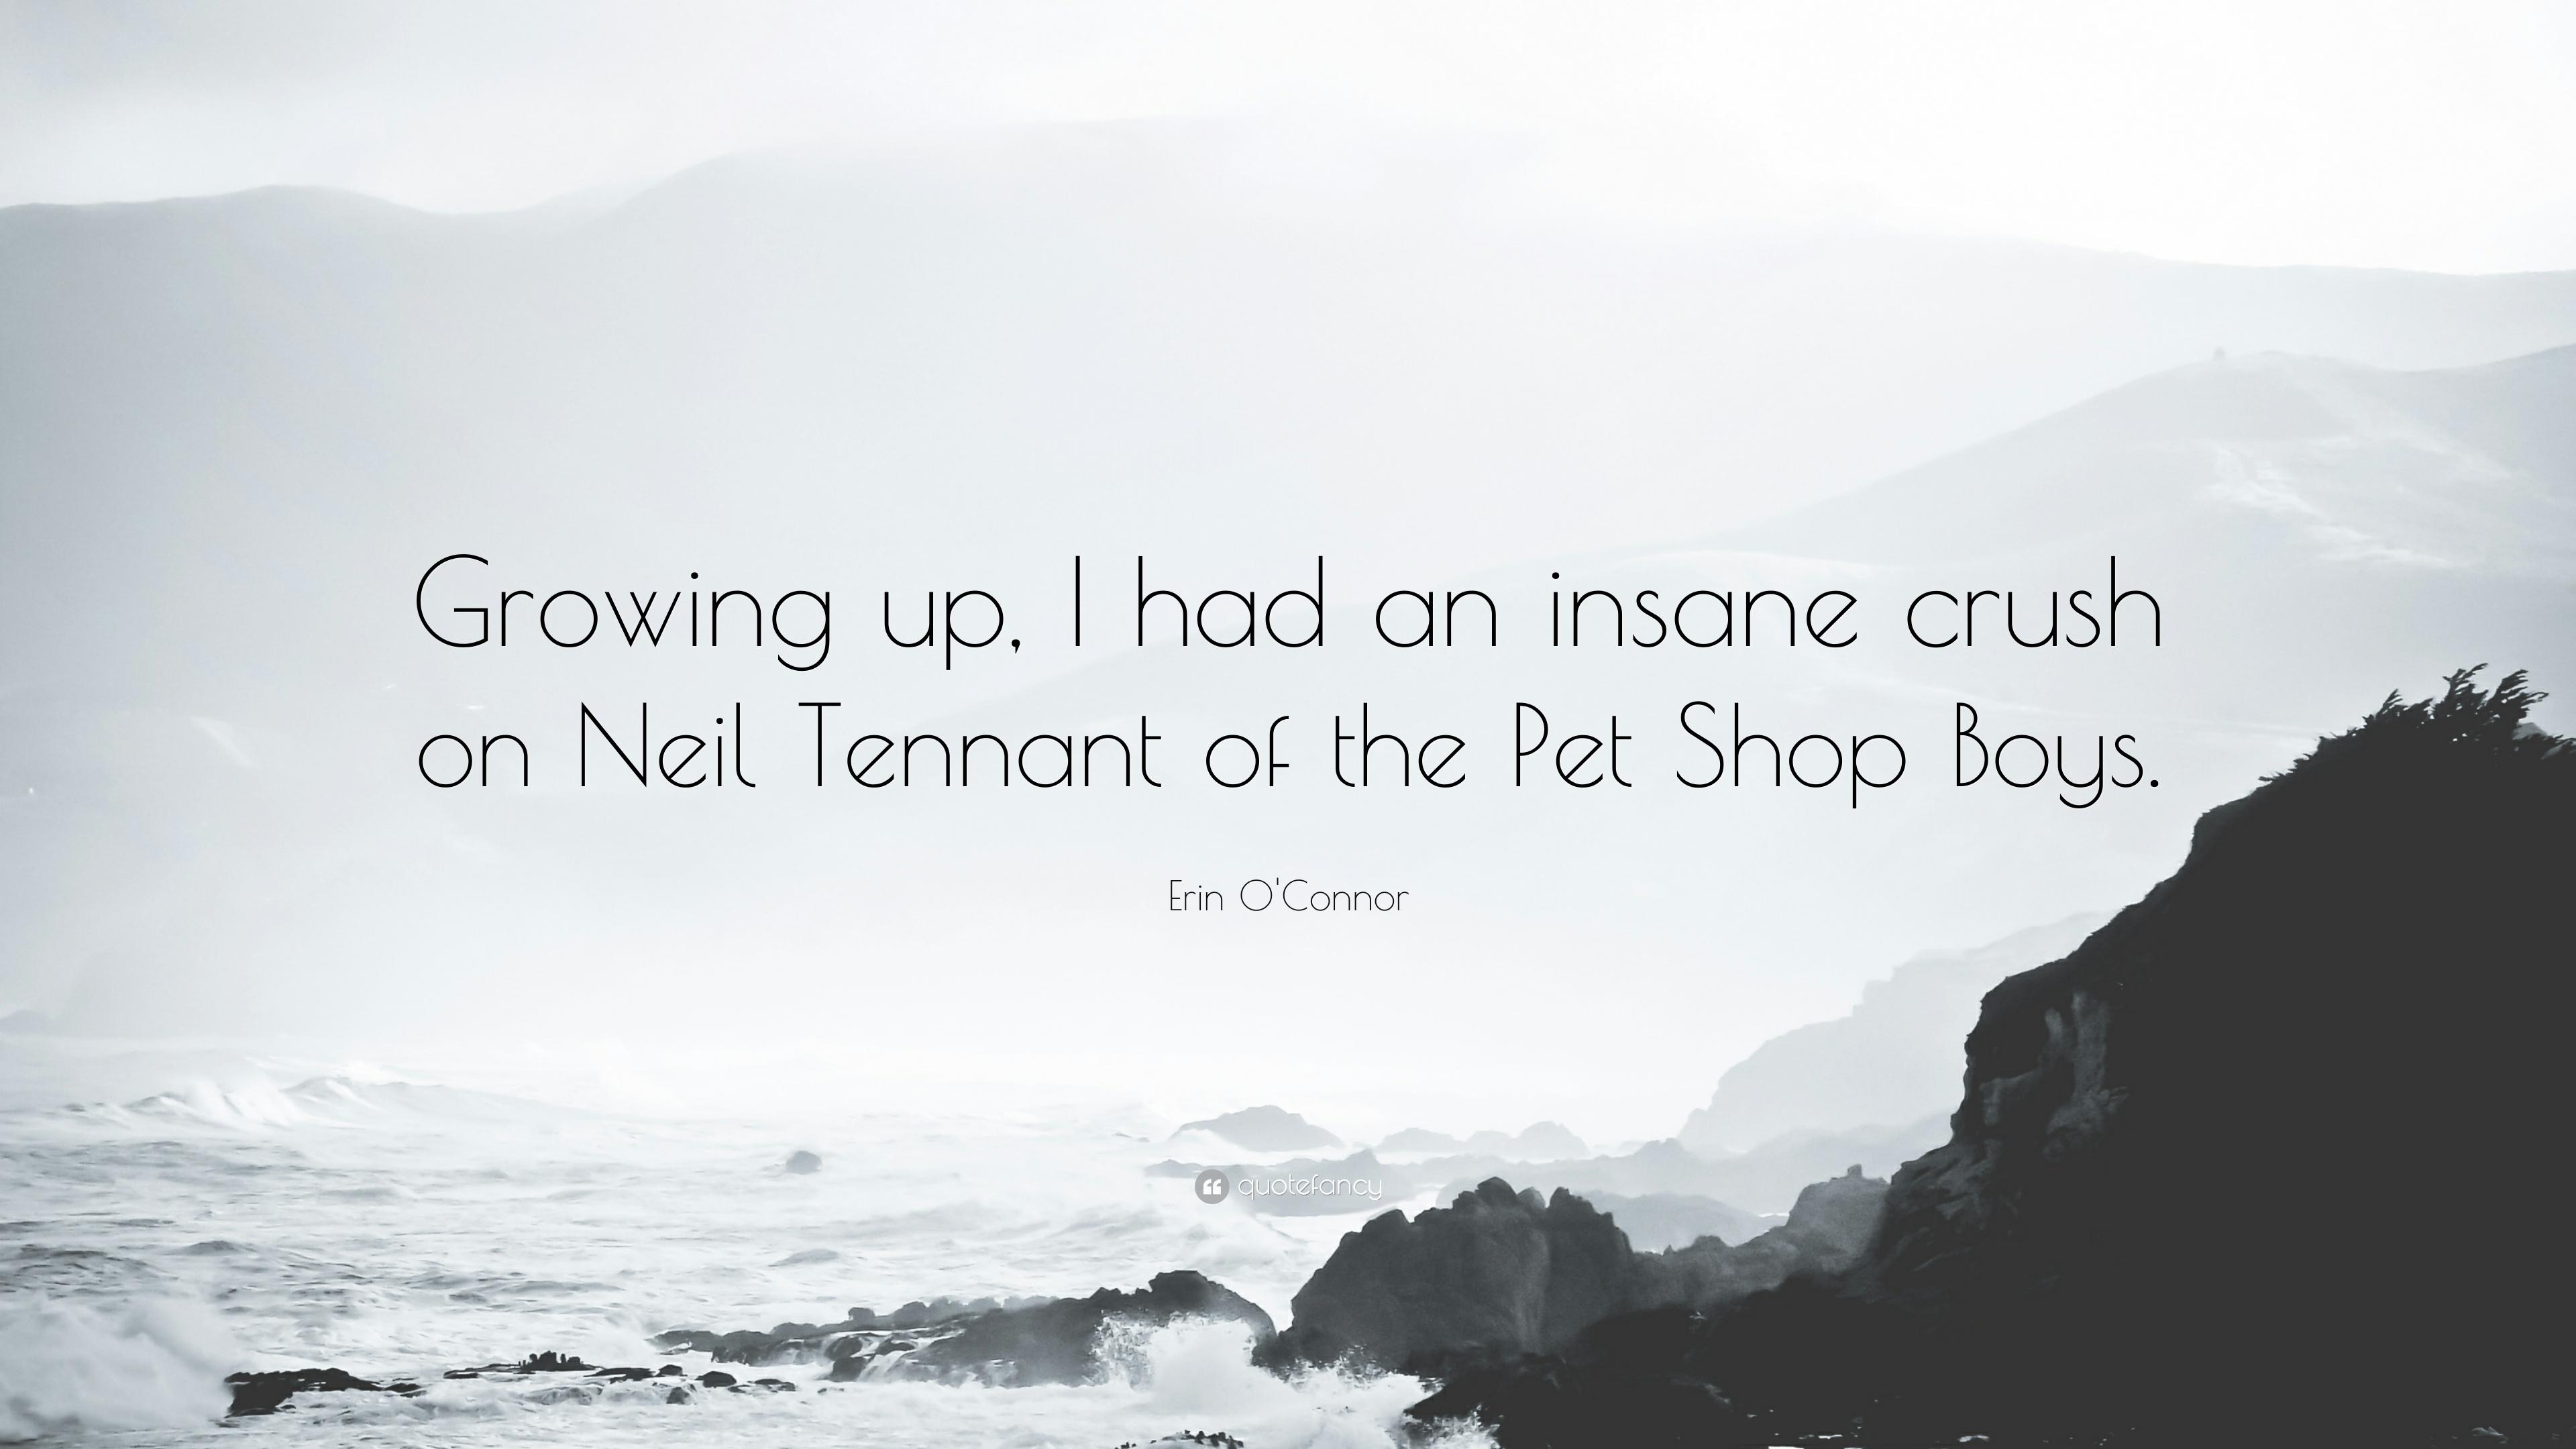 Erin O'Connor Quote: “Growing up, I had an insane crush on Neil